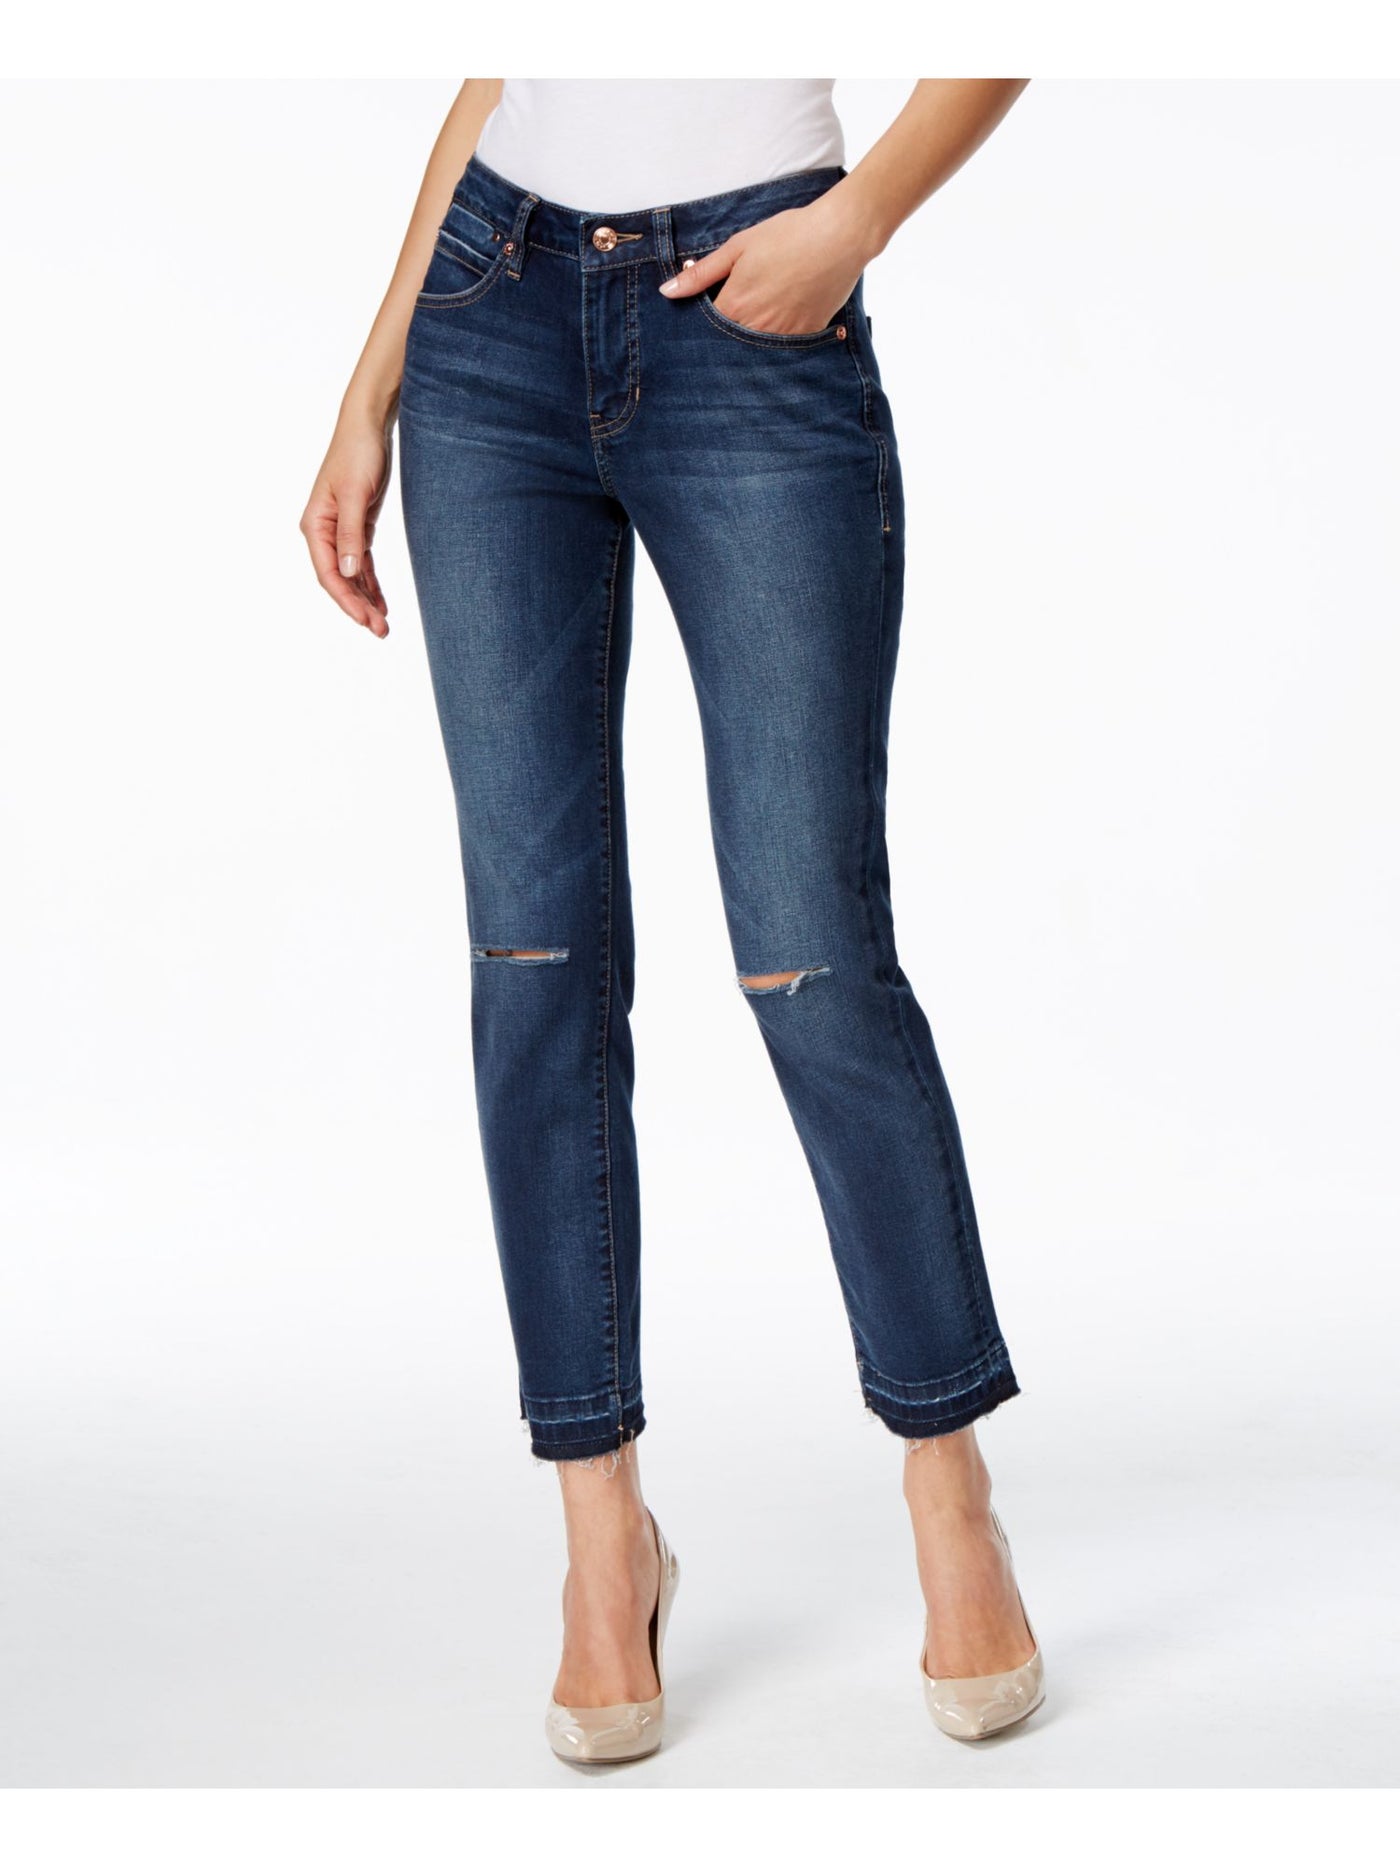 JAG Womens Blue Cuffed Jeans Size: S